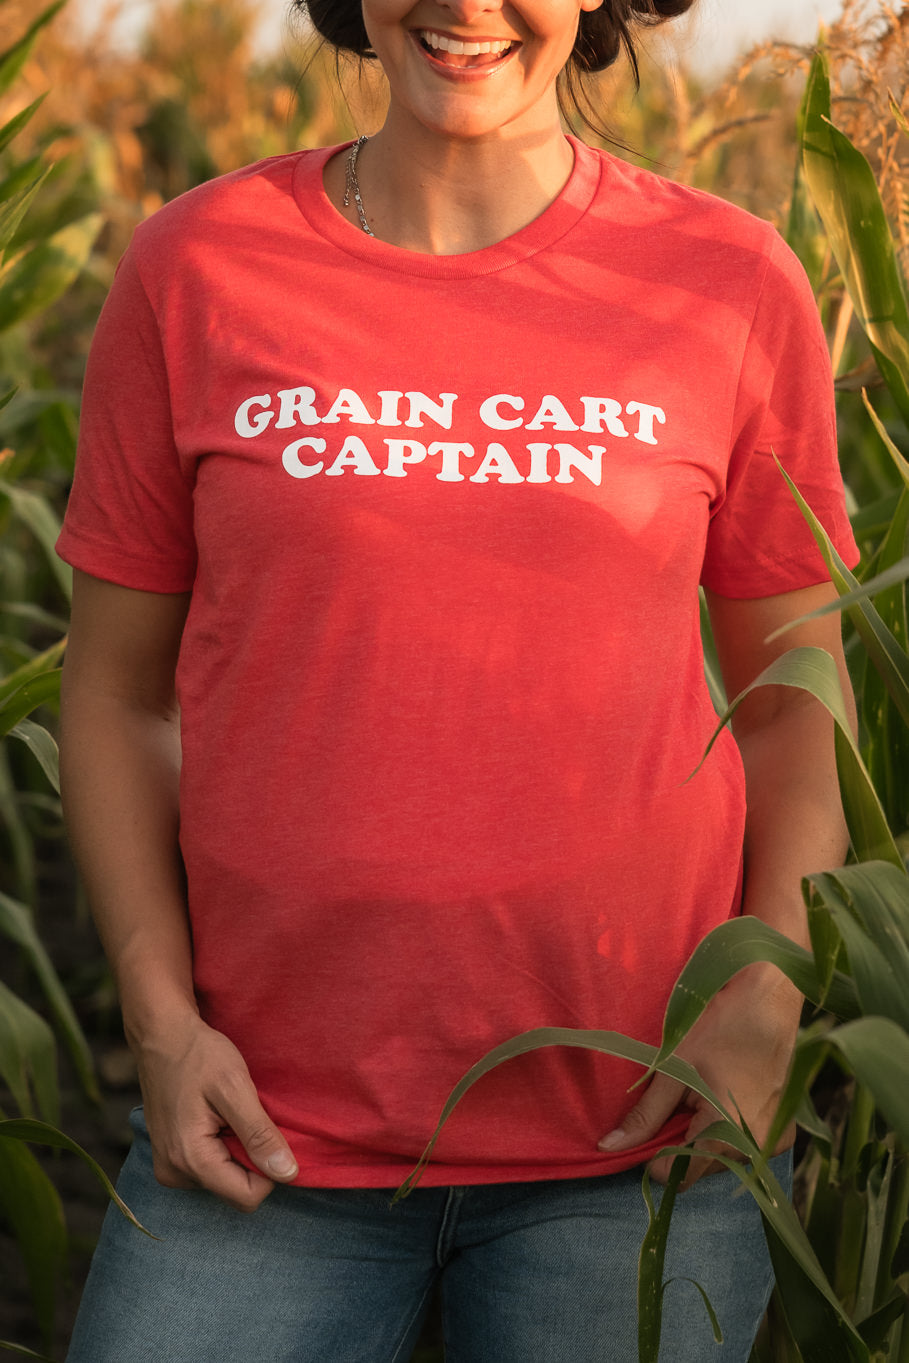 Grain Cart Captain Graphic Tee in Heather Red | Sizes S - 3XL - Rosebud's Tees